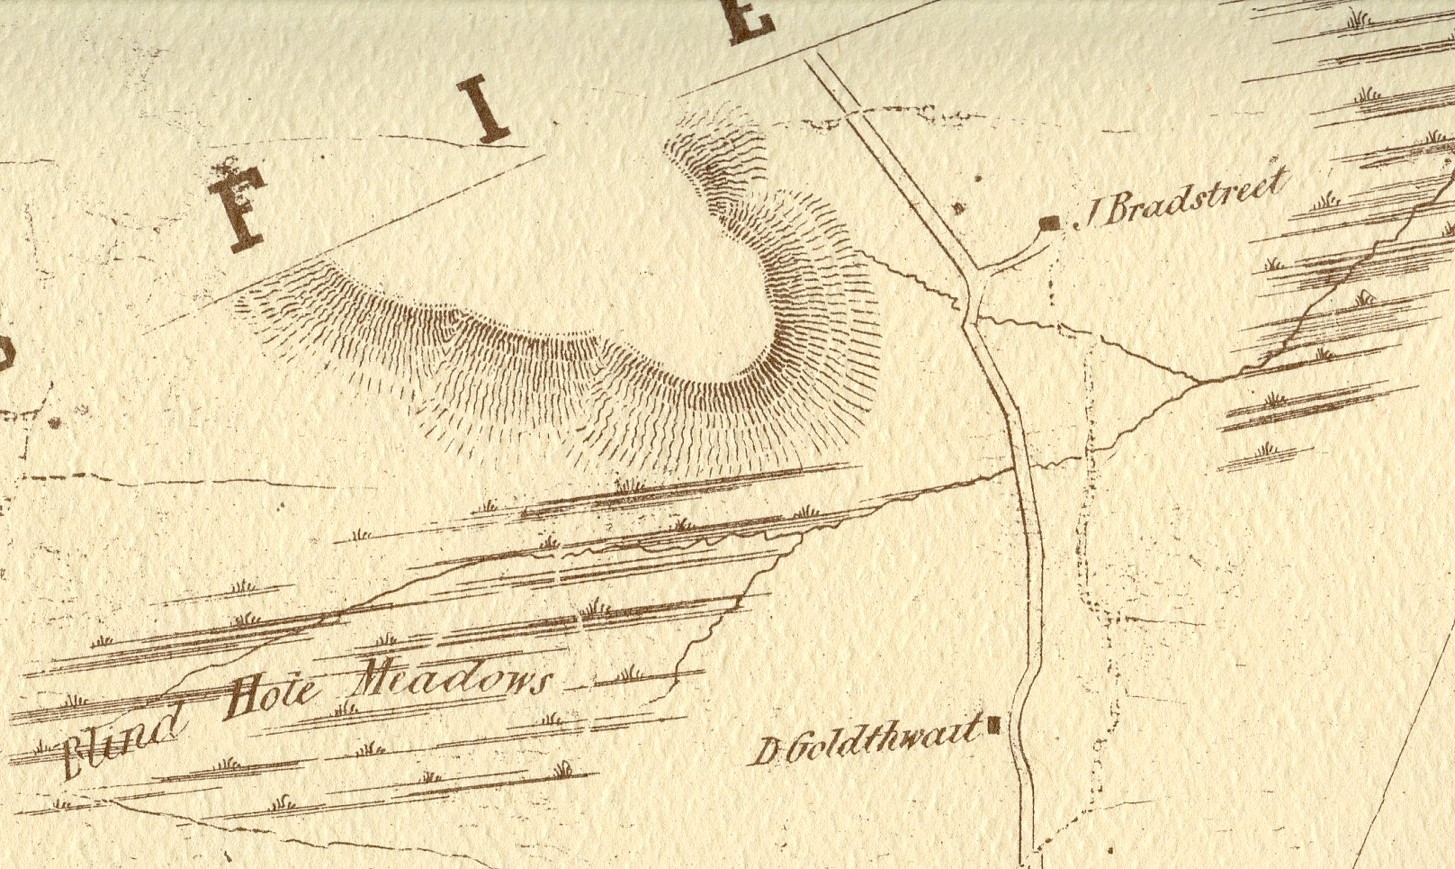 The Bradstreet house shown on an 1852 map